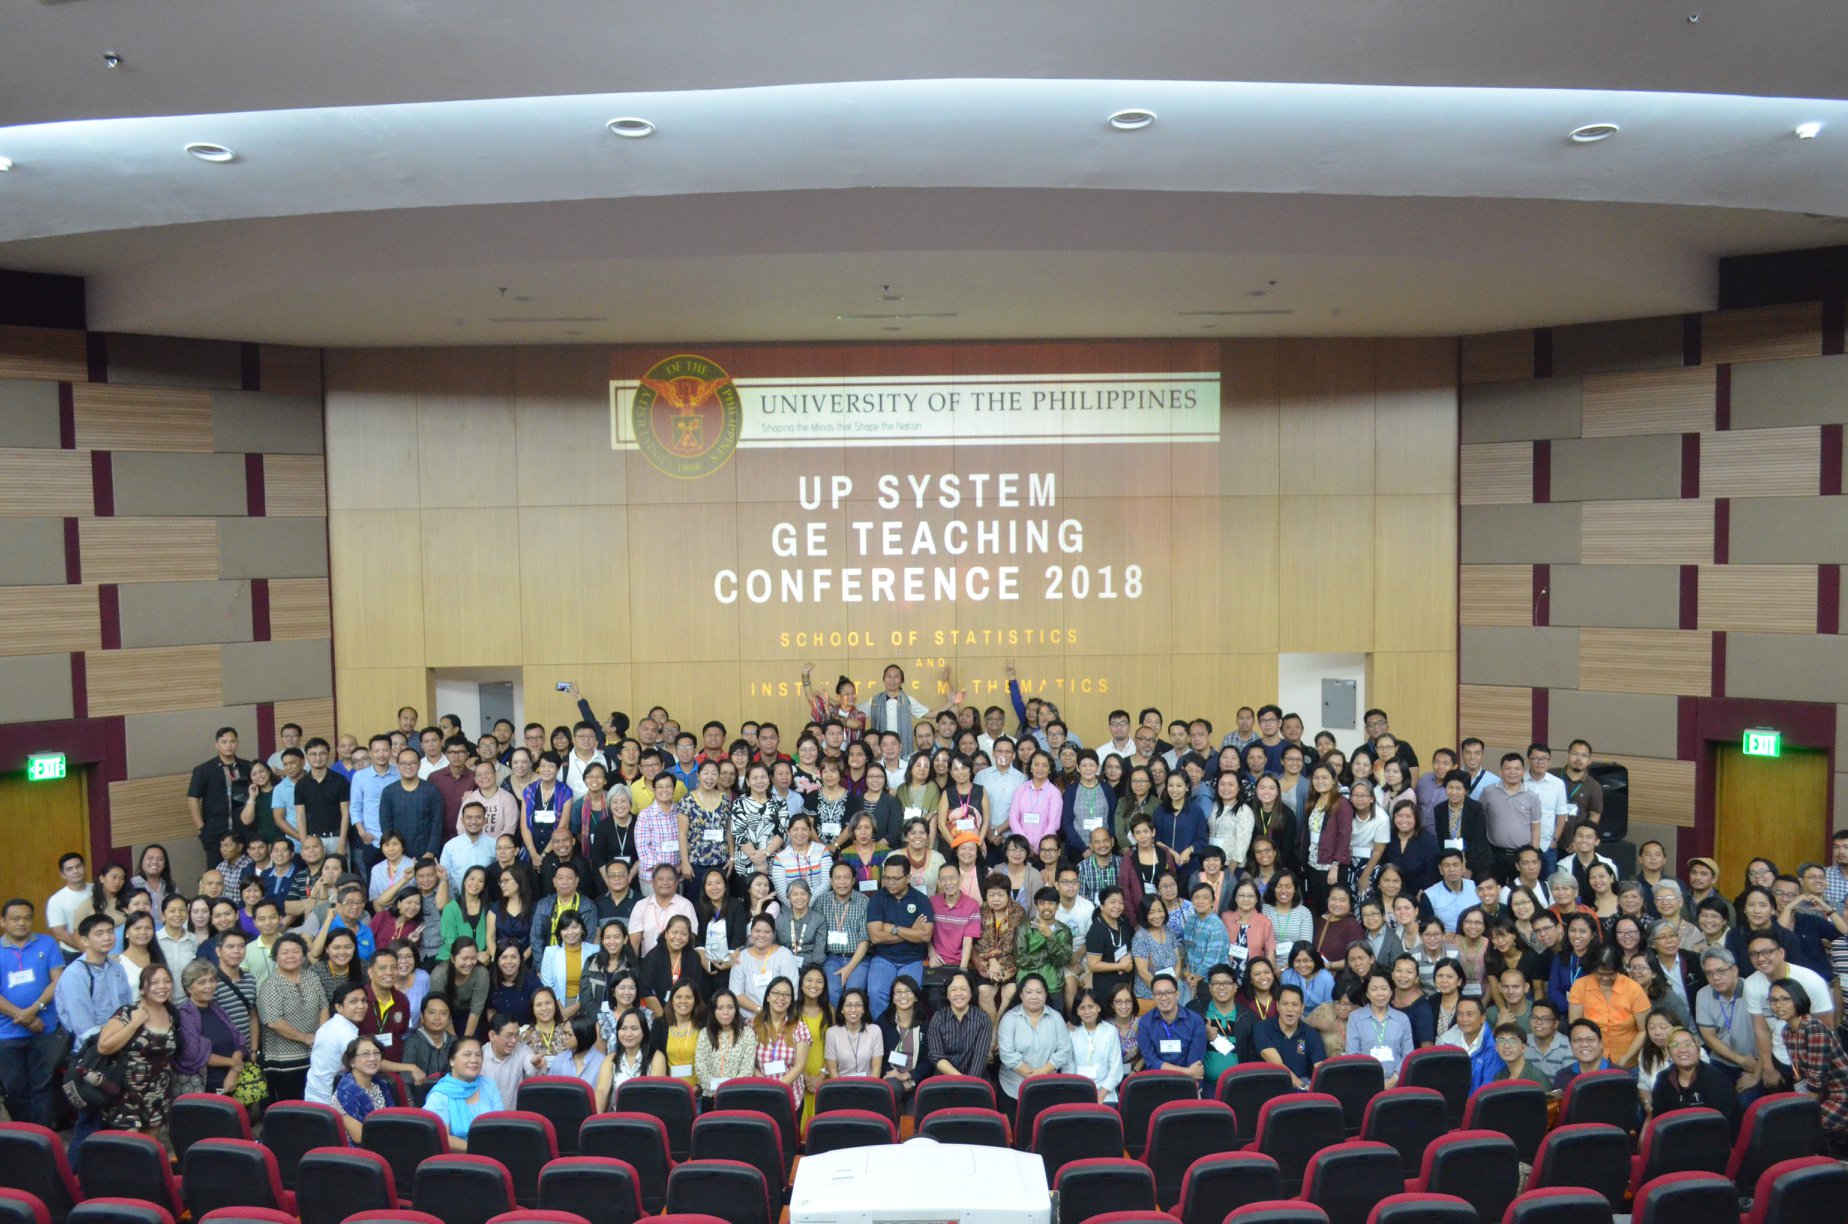 GE System Teaching Conference 2018